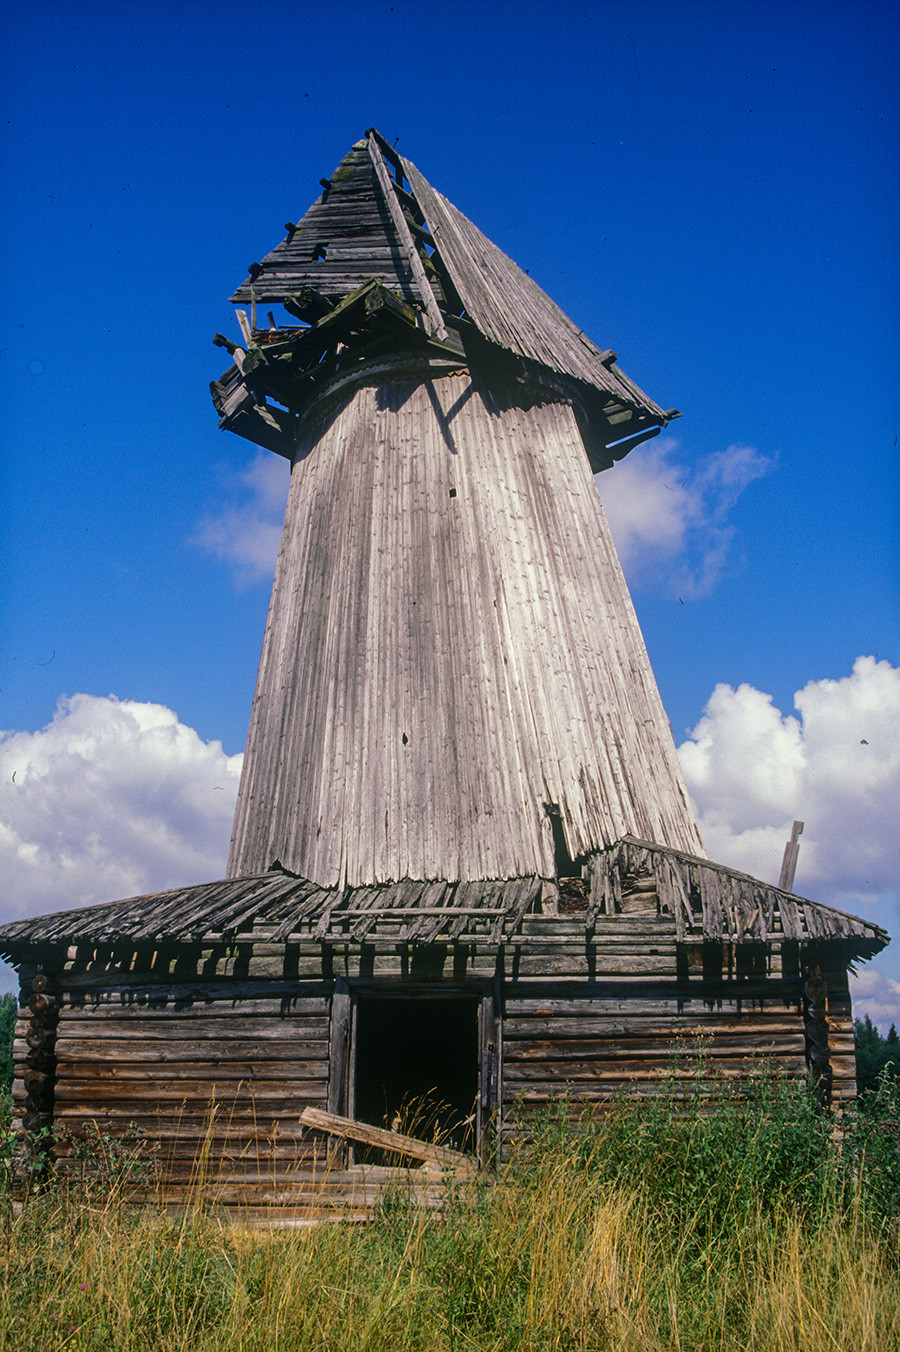  Zakharyevo. Remnants of tower windmill. August 7, 2001